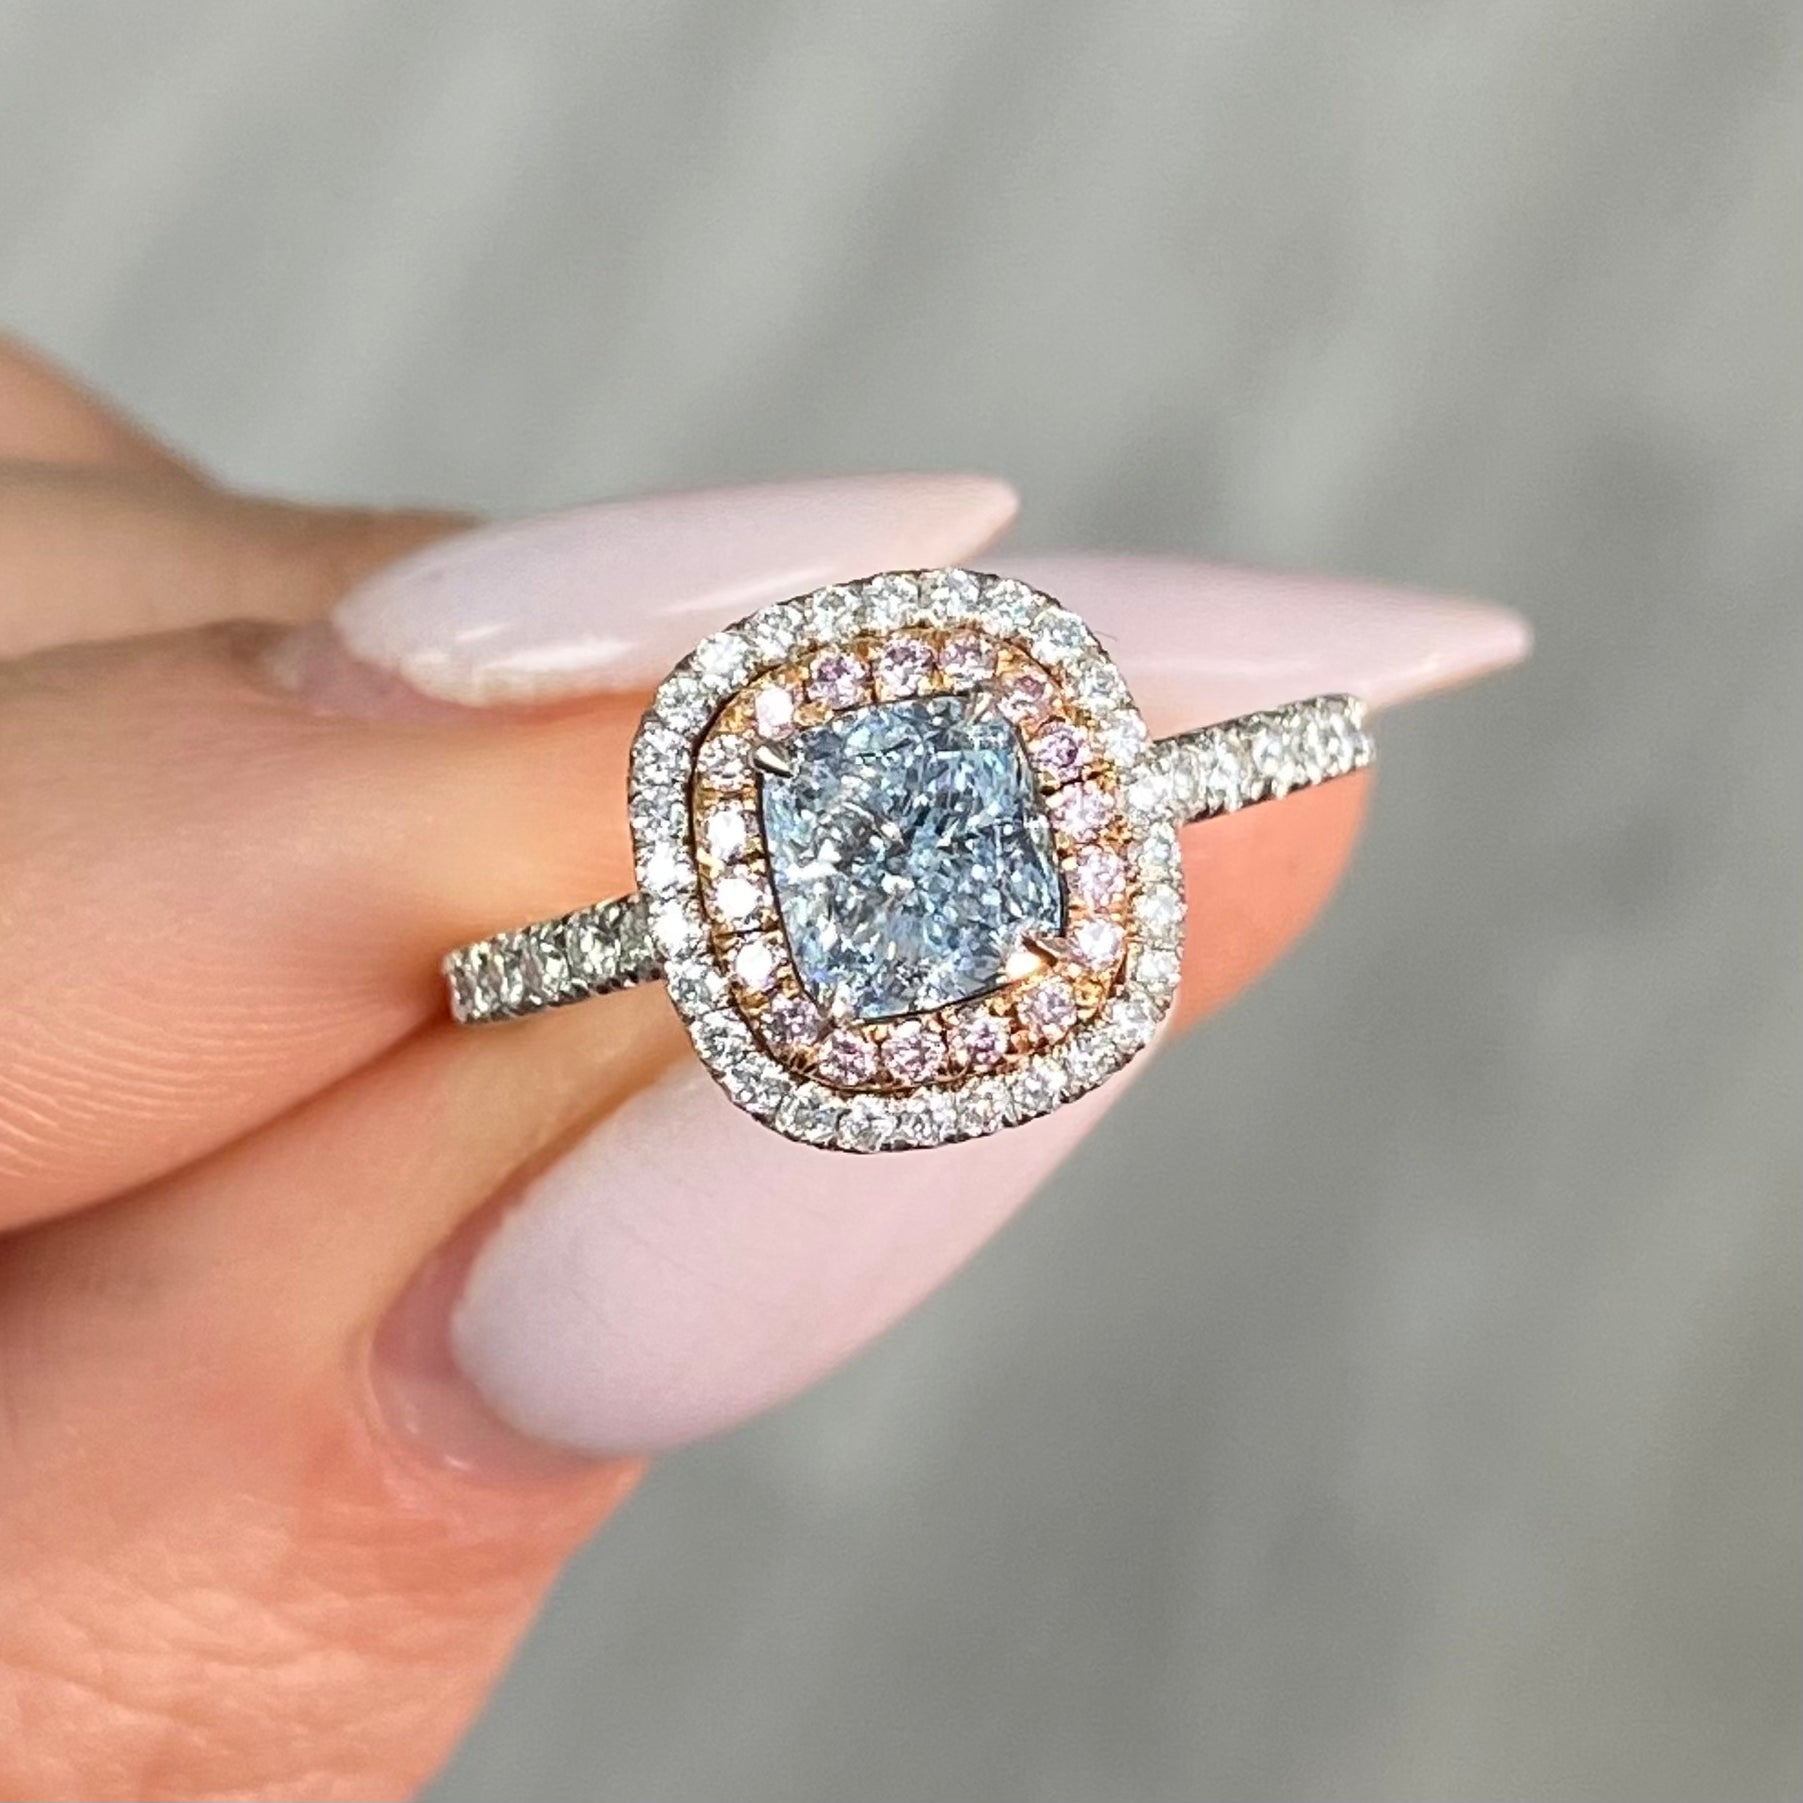 natural blue diamond ring, with blue cushion cut diamond surrounded by pink and white diamonds in a double halo ring design